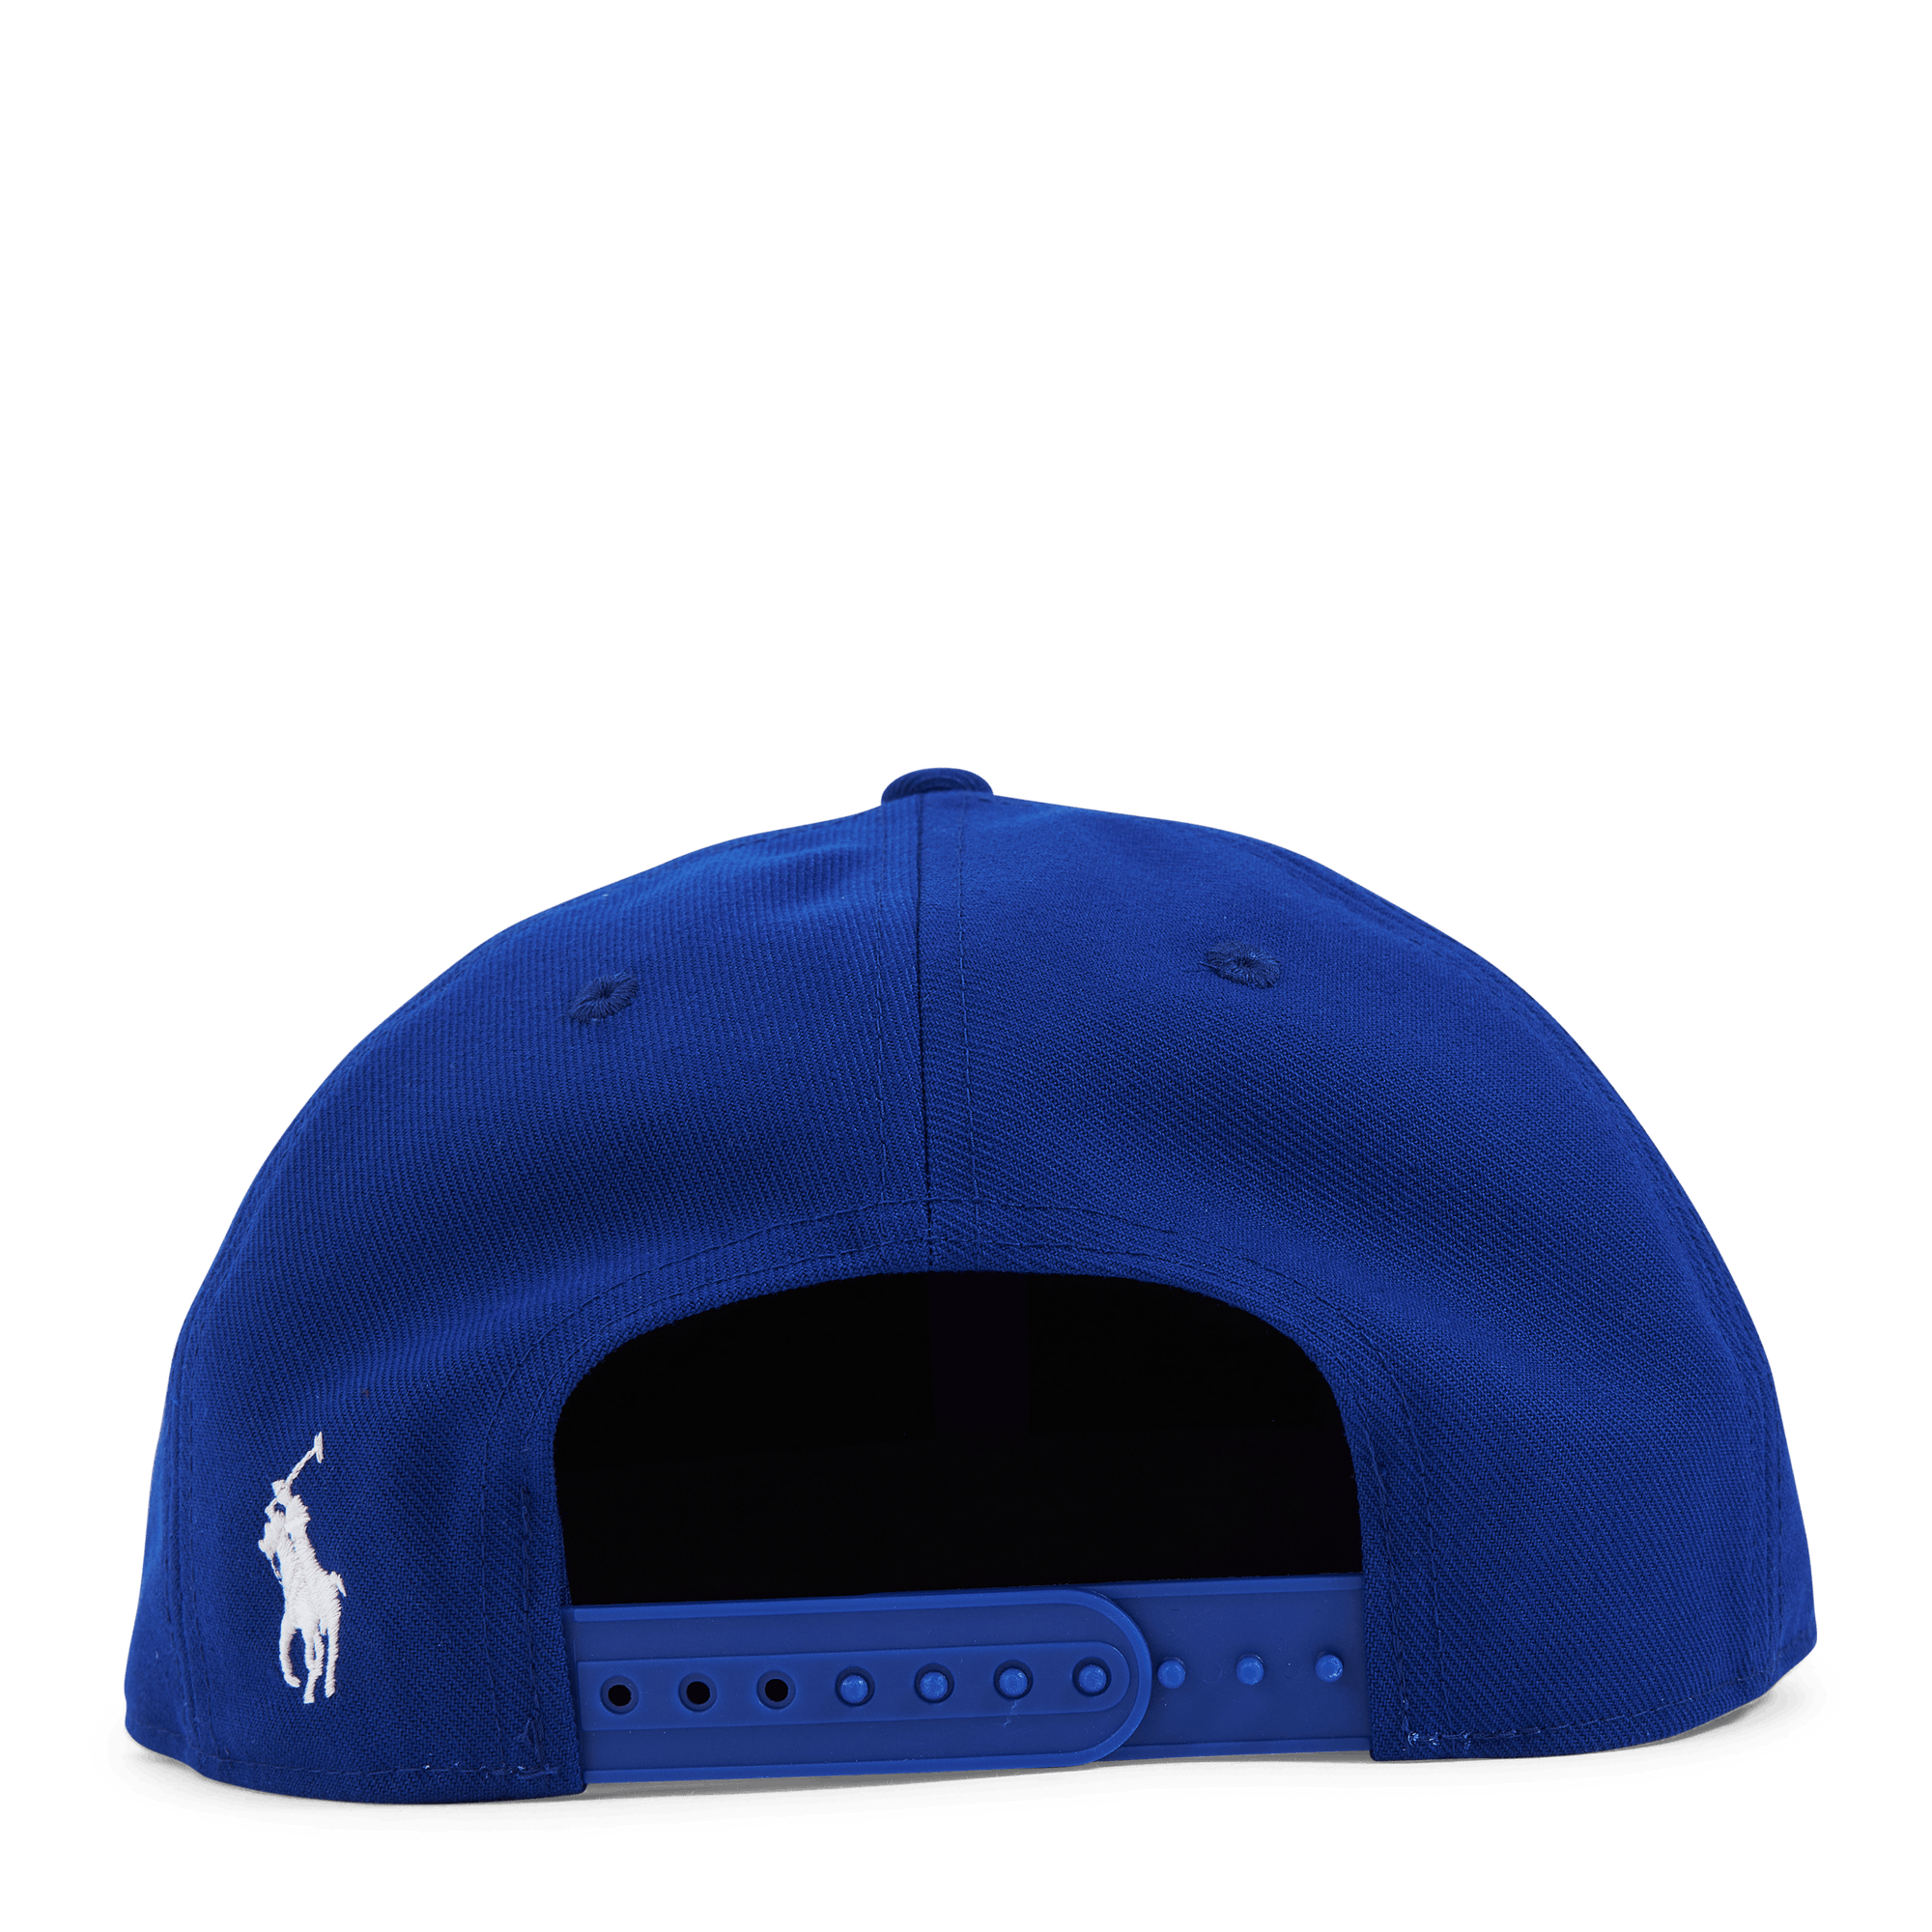 Logo-Embroidered Twill Ball Cap